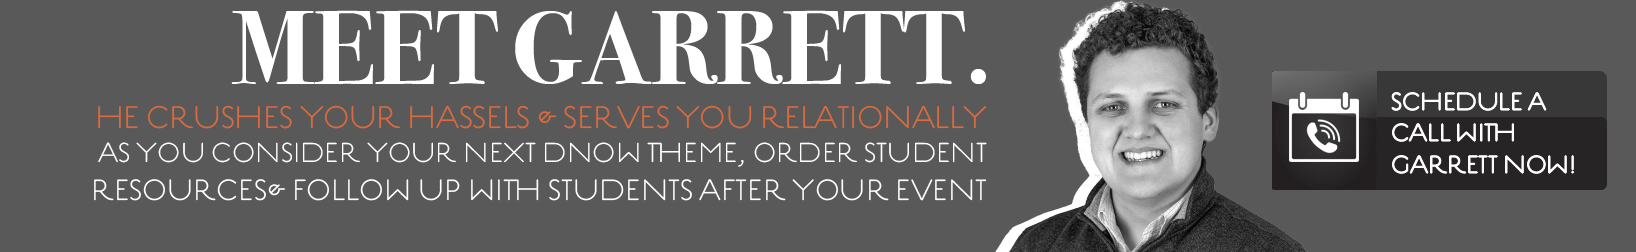 Schedule a call with Garrett to take about your youth ministry Bible study.